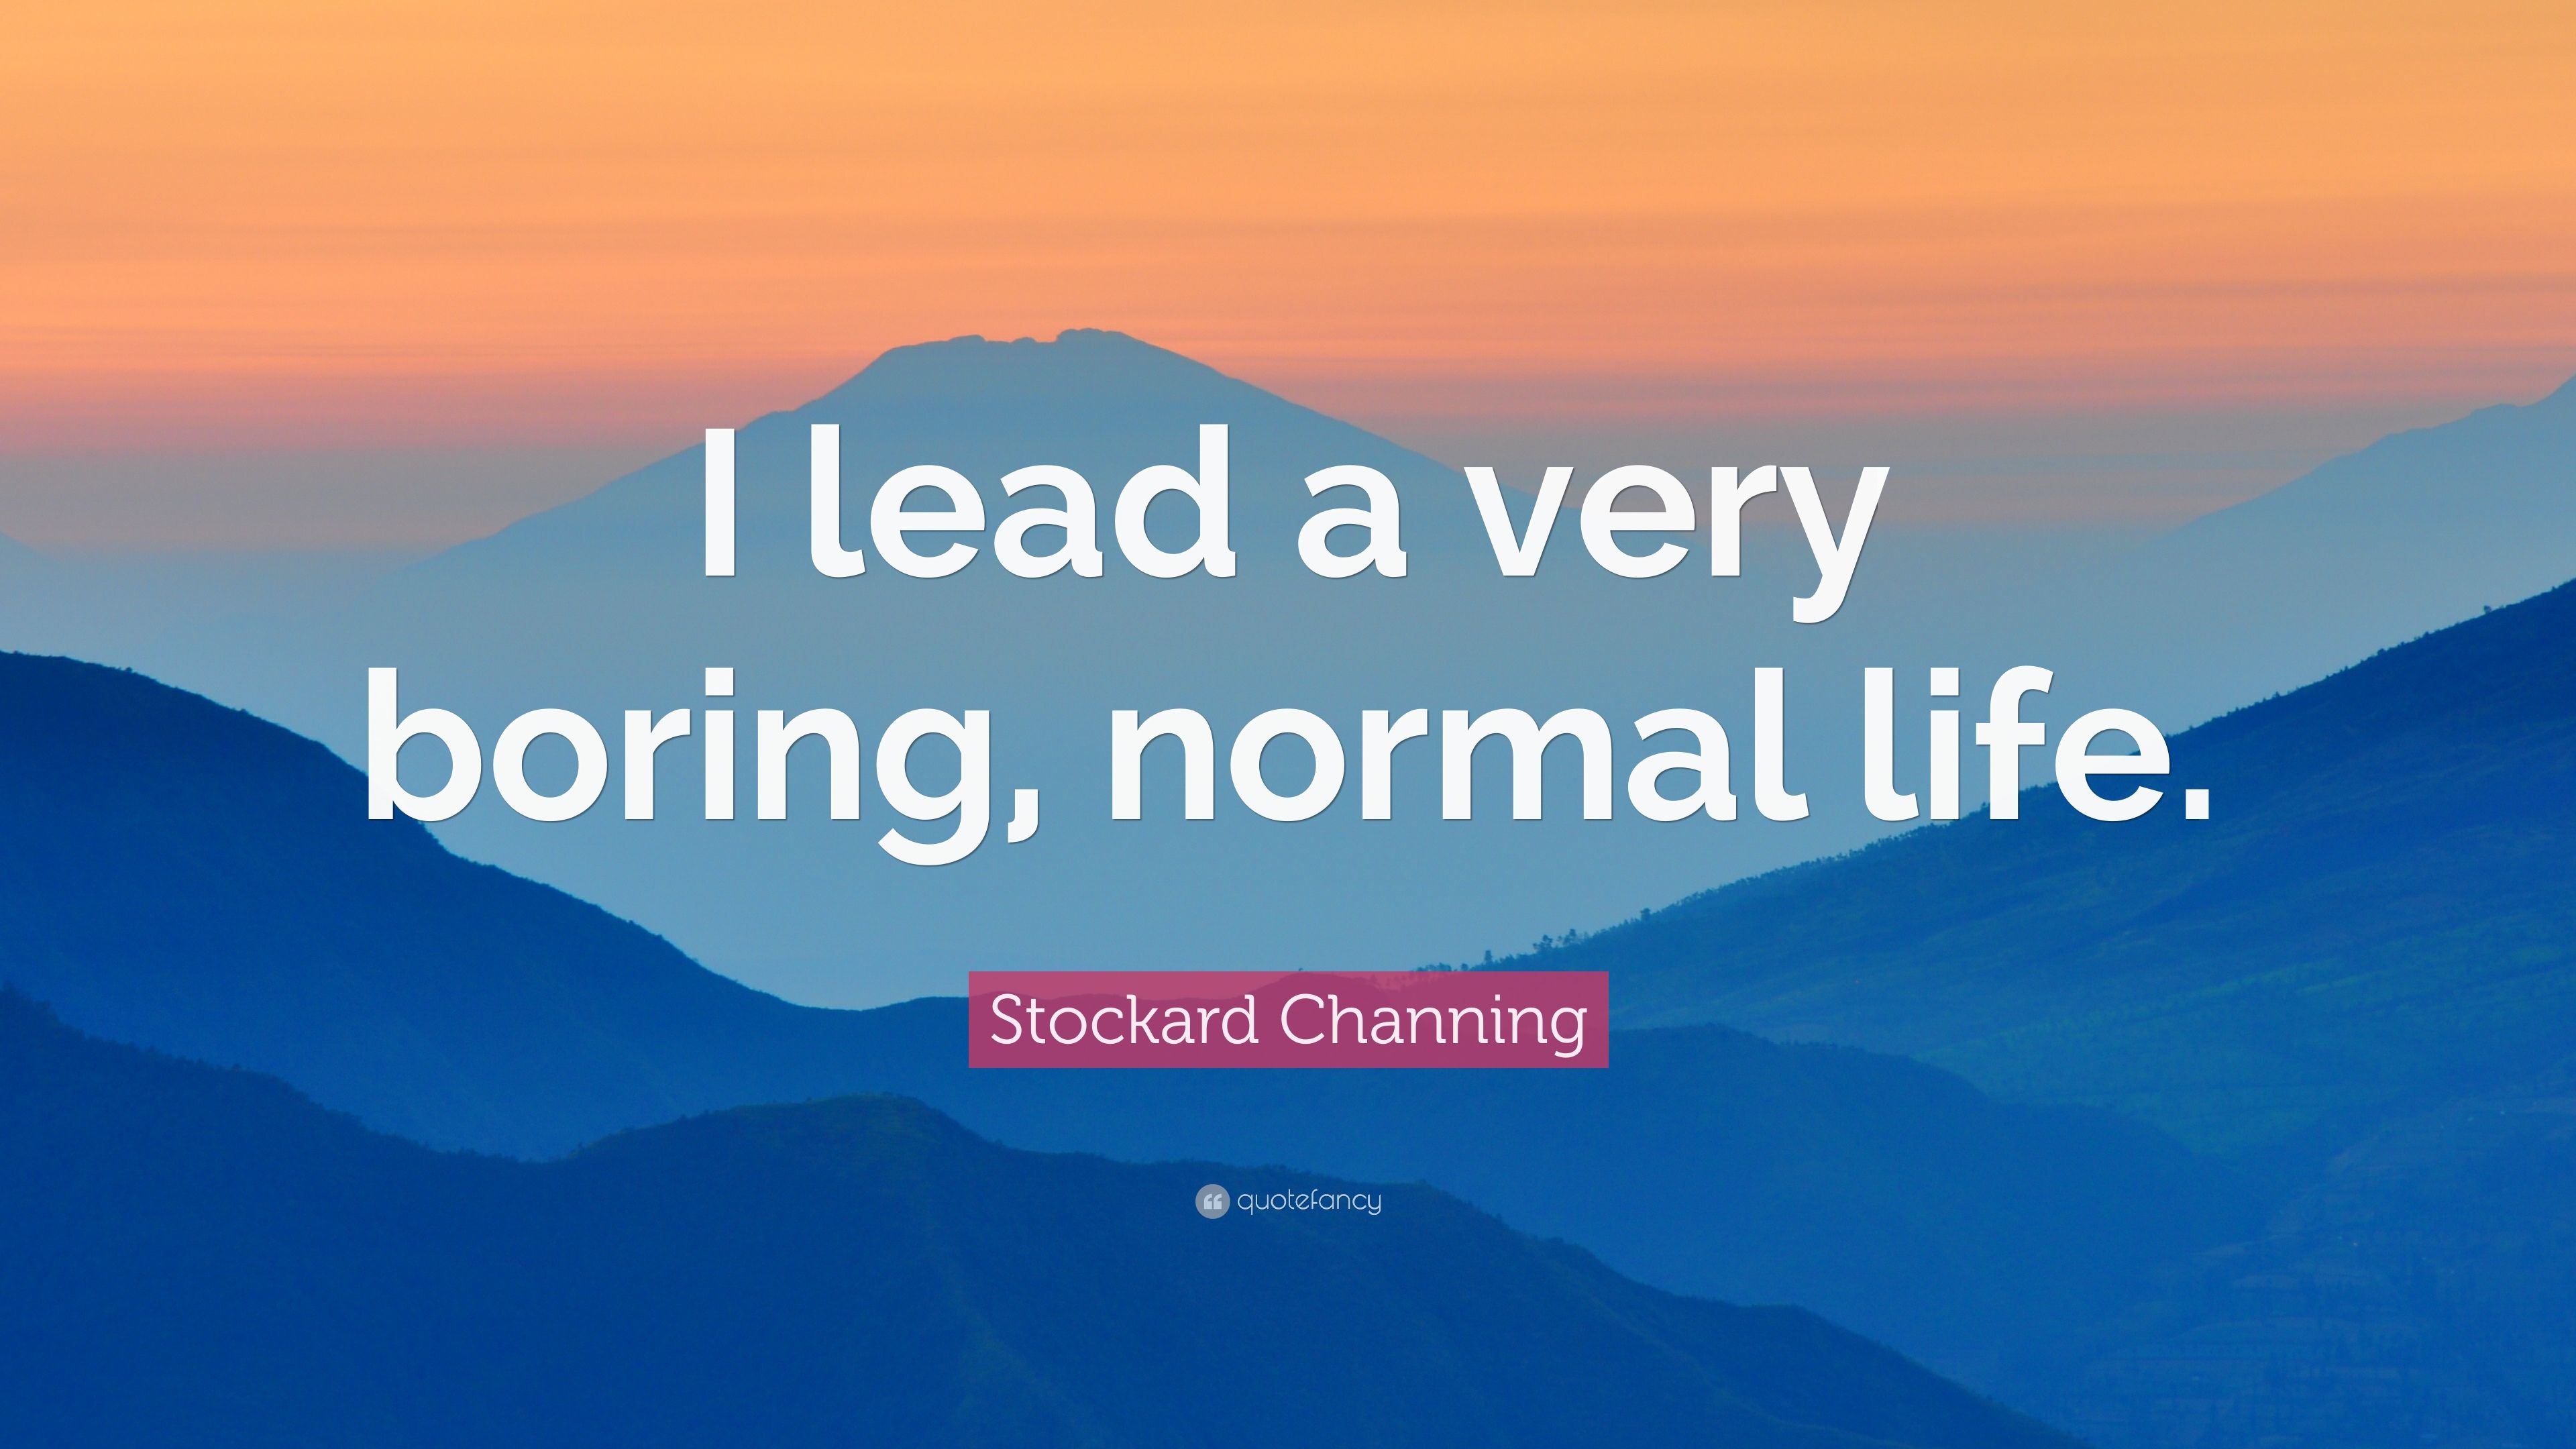 Stockard Channing Quote: “I lead a very boring, normal life.” (7 wallpaper)